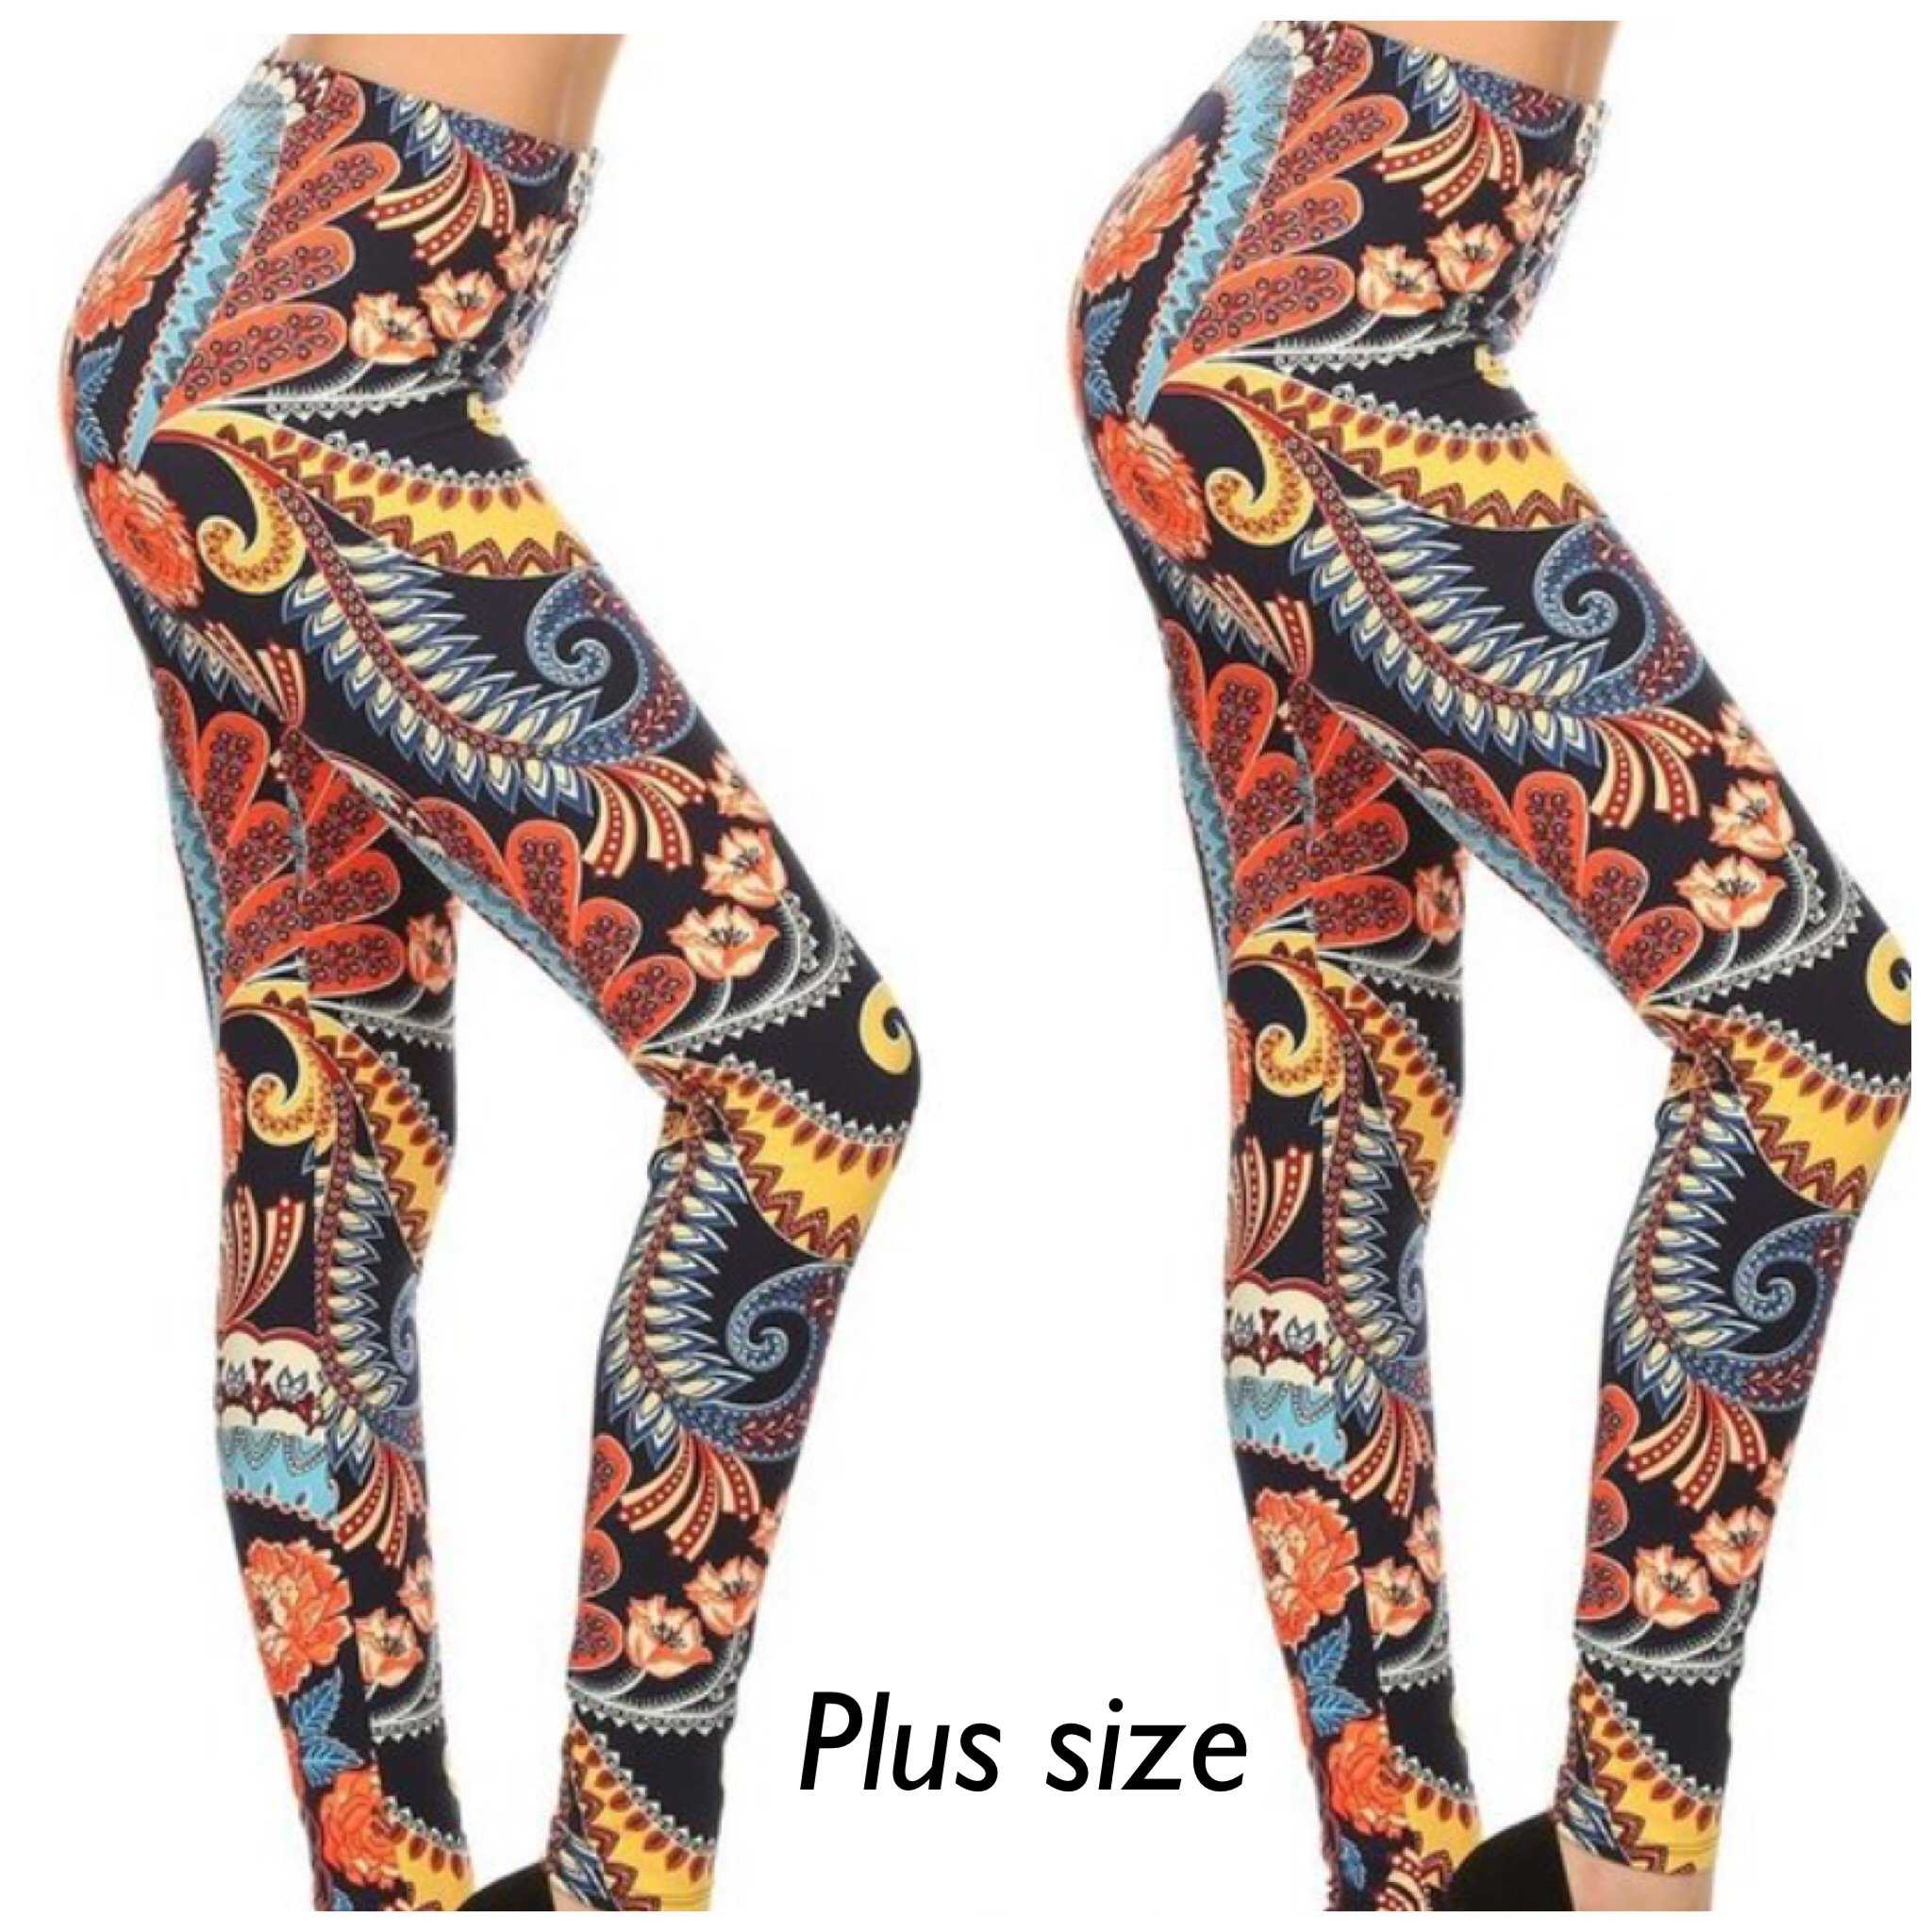 Women's Pack of 3 Plus Size Leggings Colorful Paisley, Black/White Paisley,  Brown/Multi One Size Fits Most Plus - White Mark